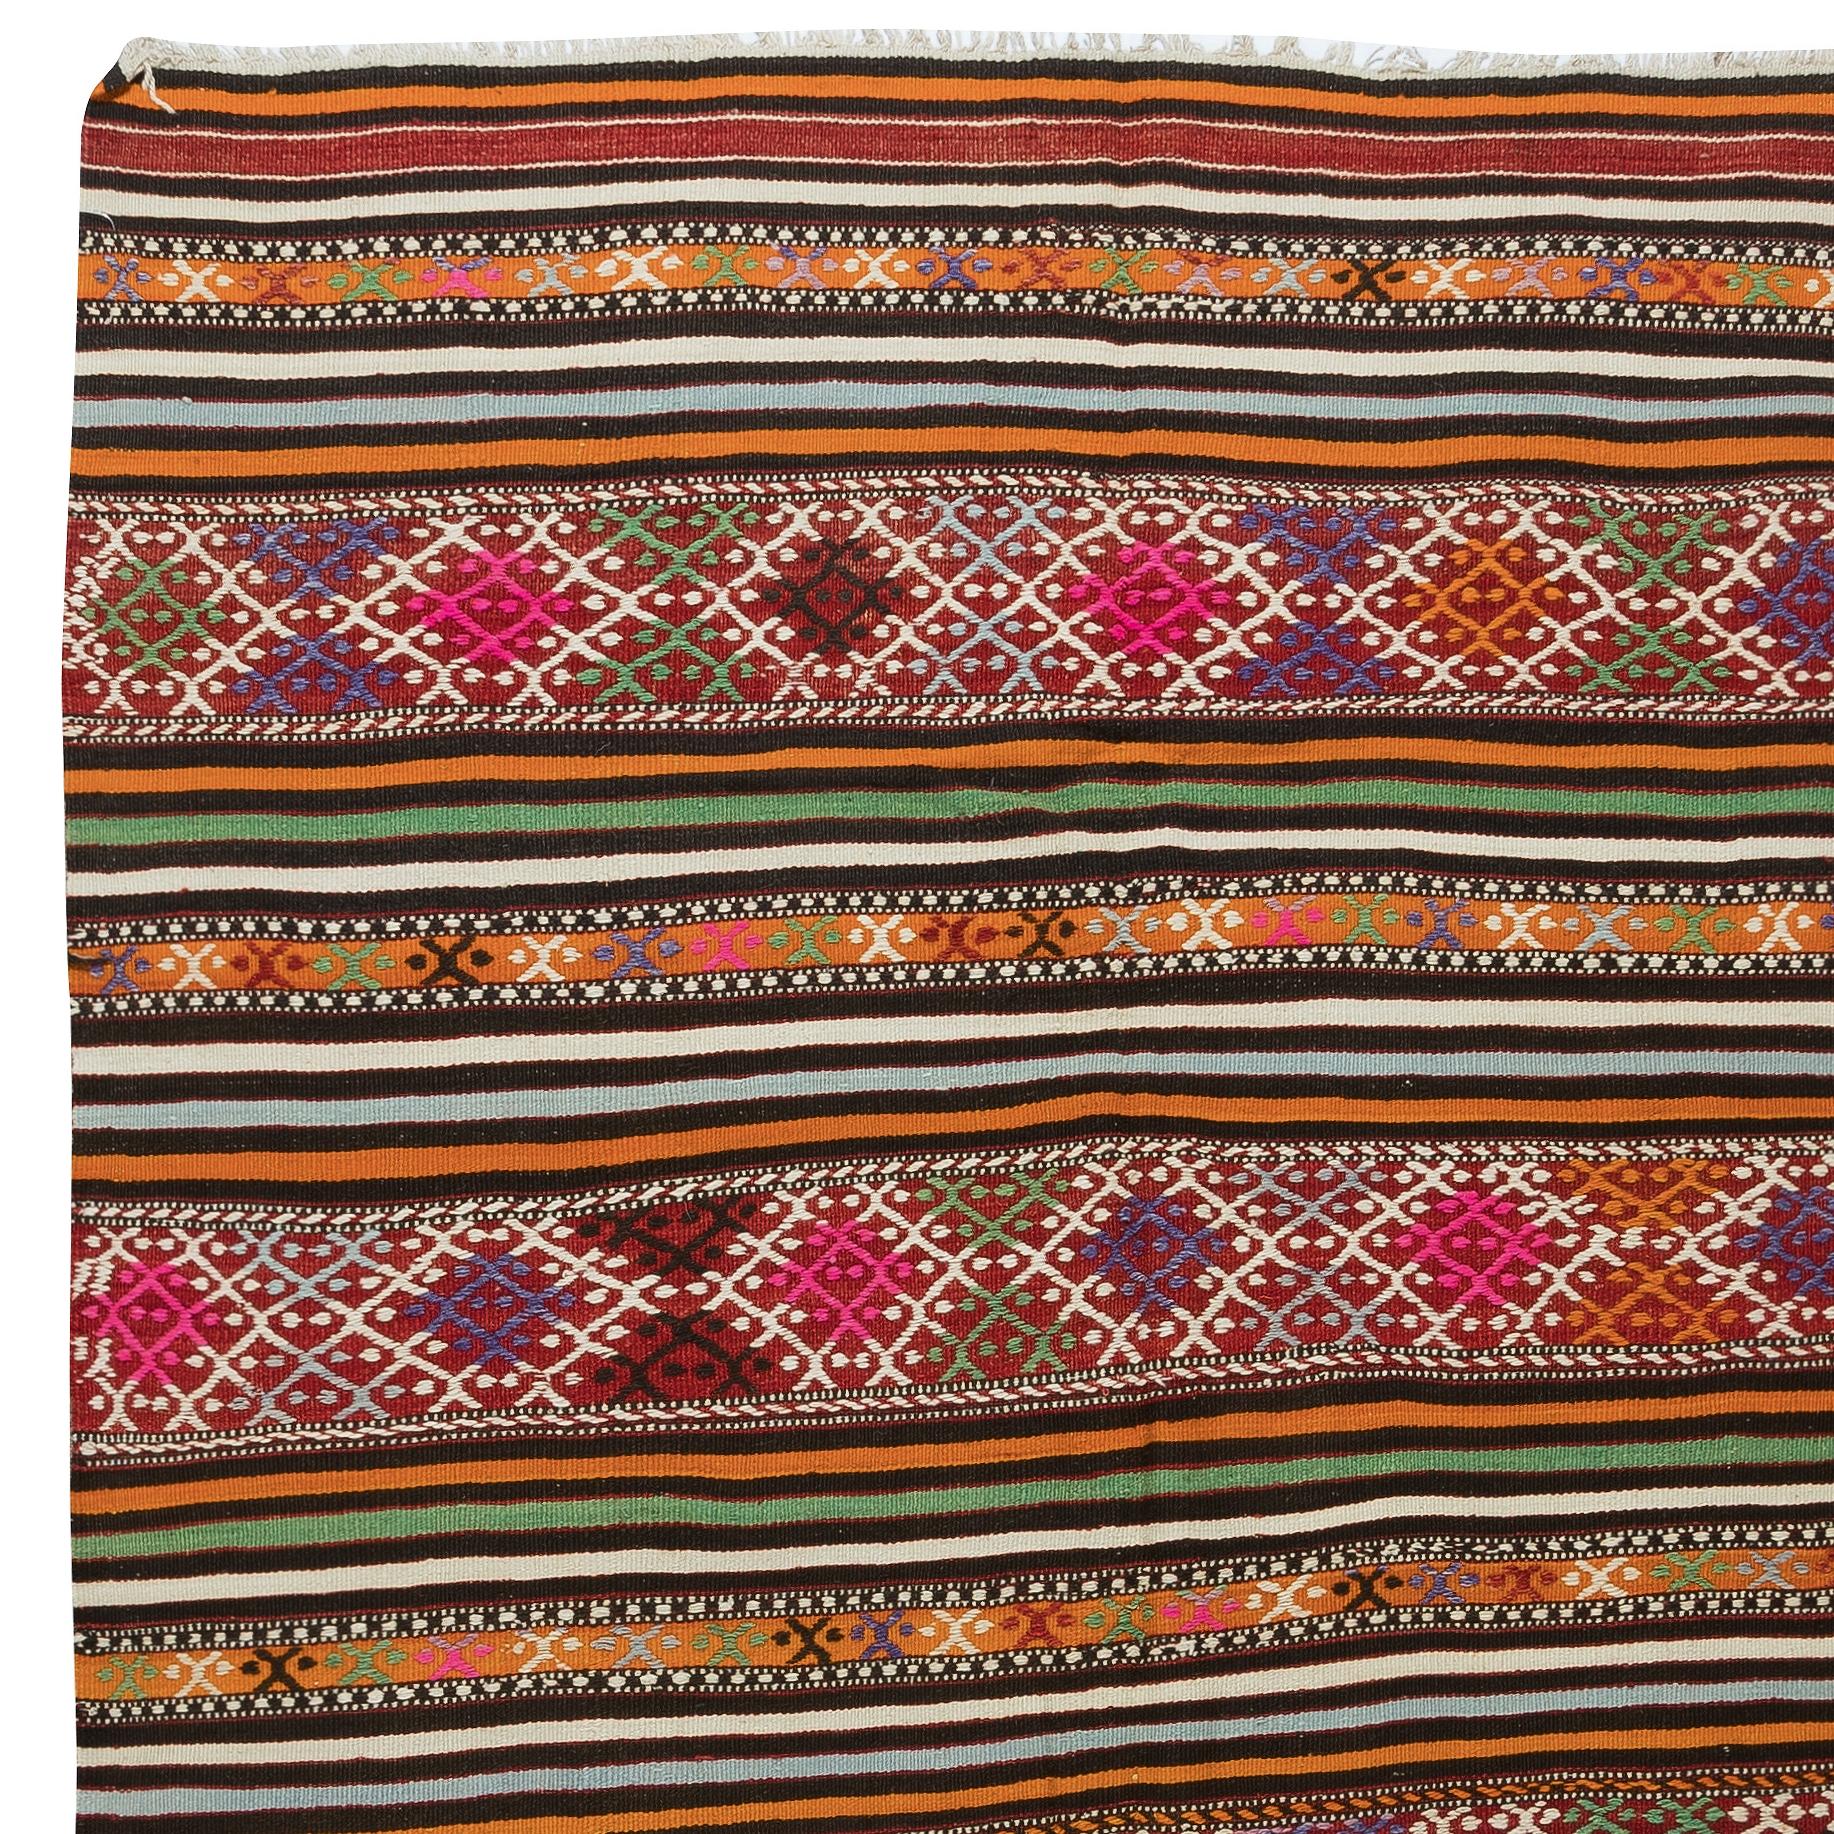 Hand-Woven 5x7.6 Ft Multicolor Handmade Wool Kilim Rug From Central Anatolia, Turkey, 1970s For Sale